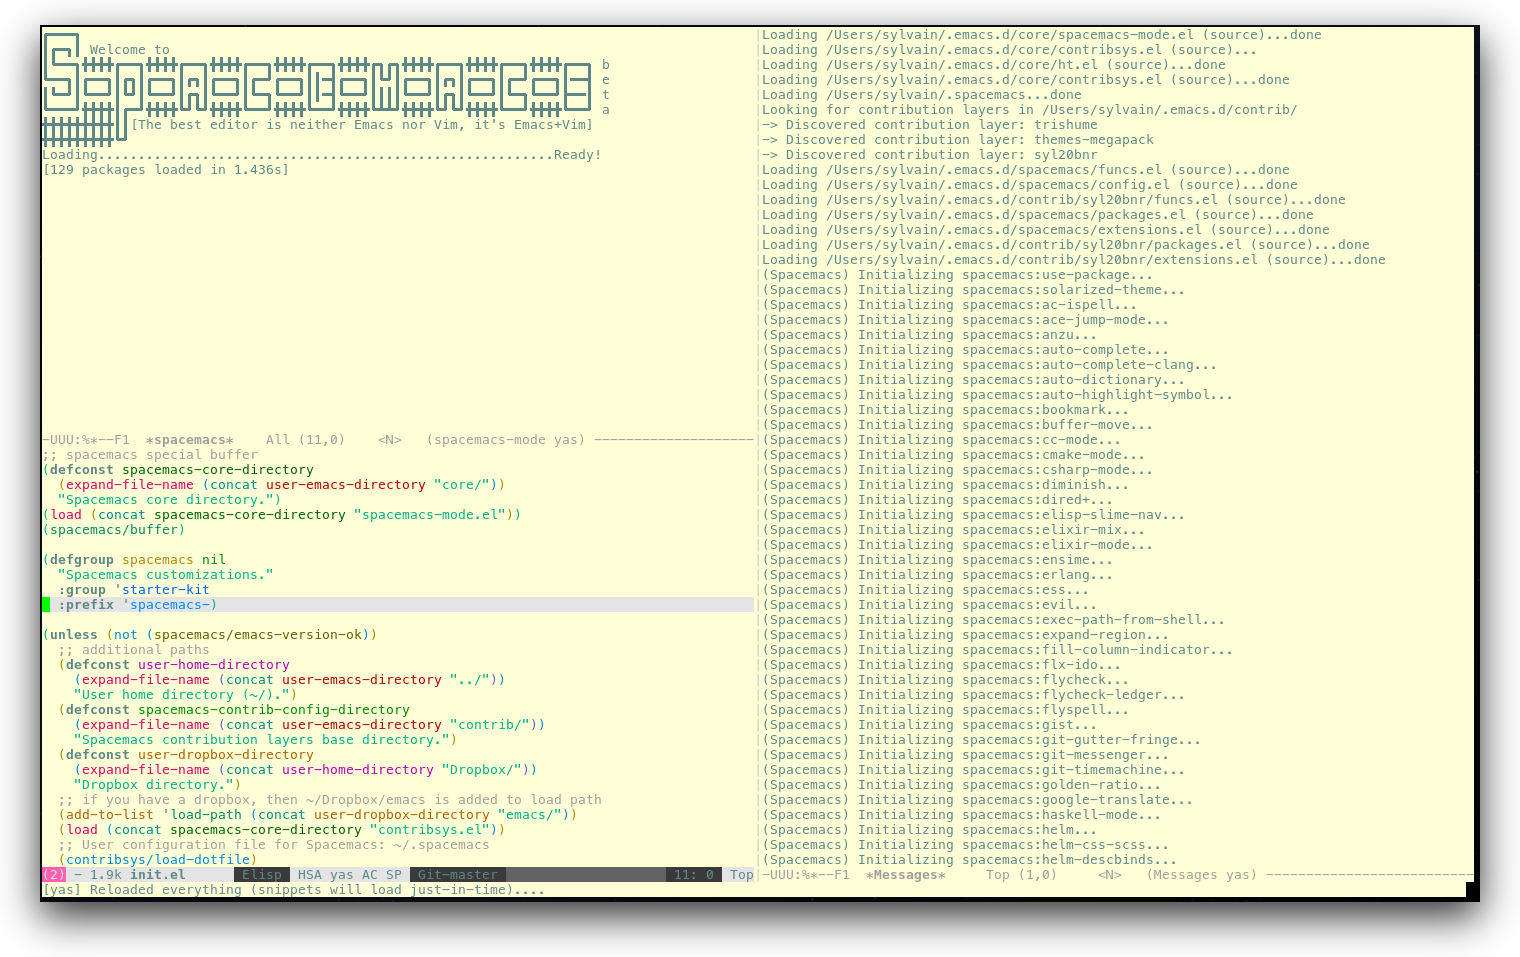 /TakeV/spacemacs/media/commit/fef908acad9406ea89263886c58d69c24a3c25a9/doc/img/spacemacs-urxvt.png